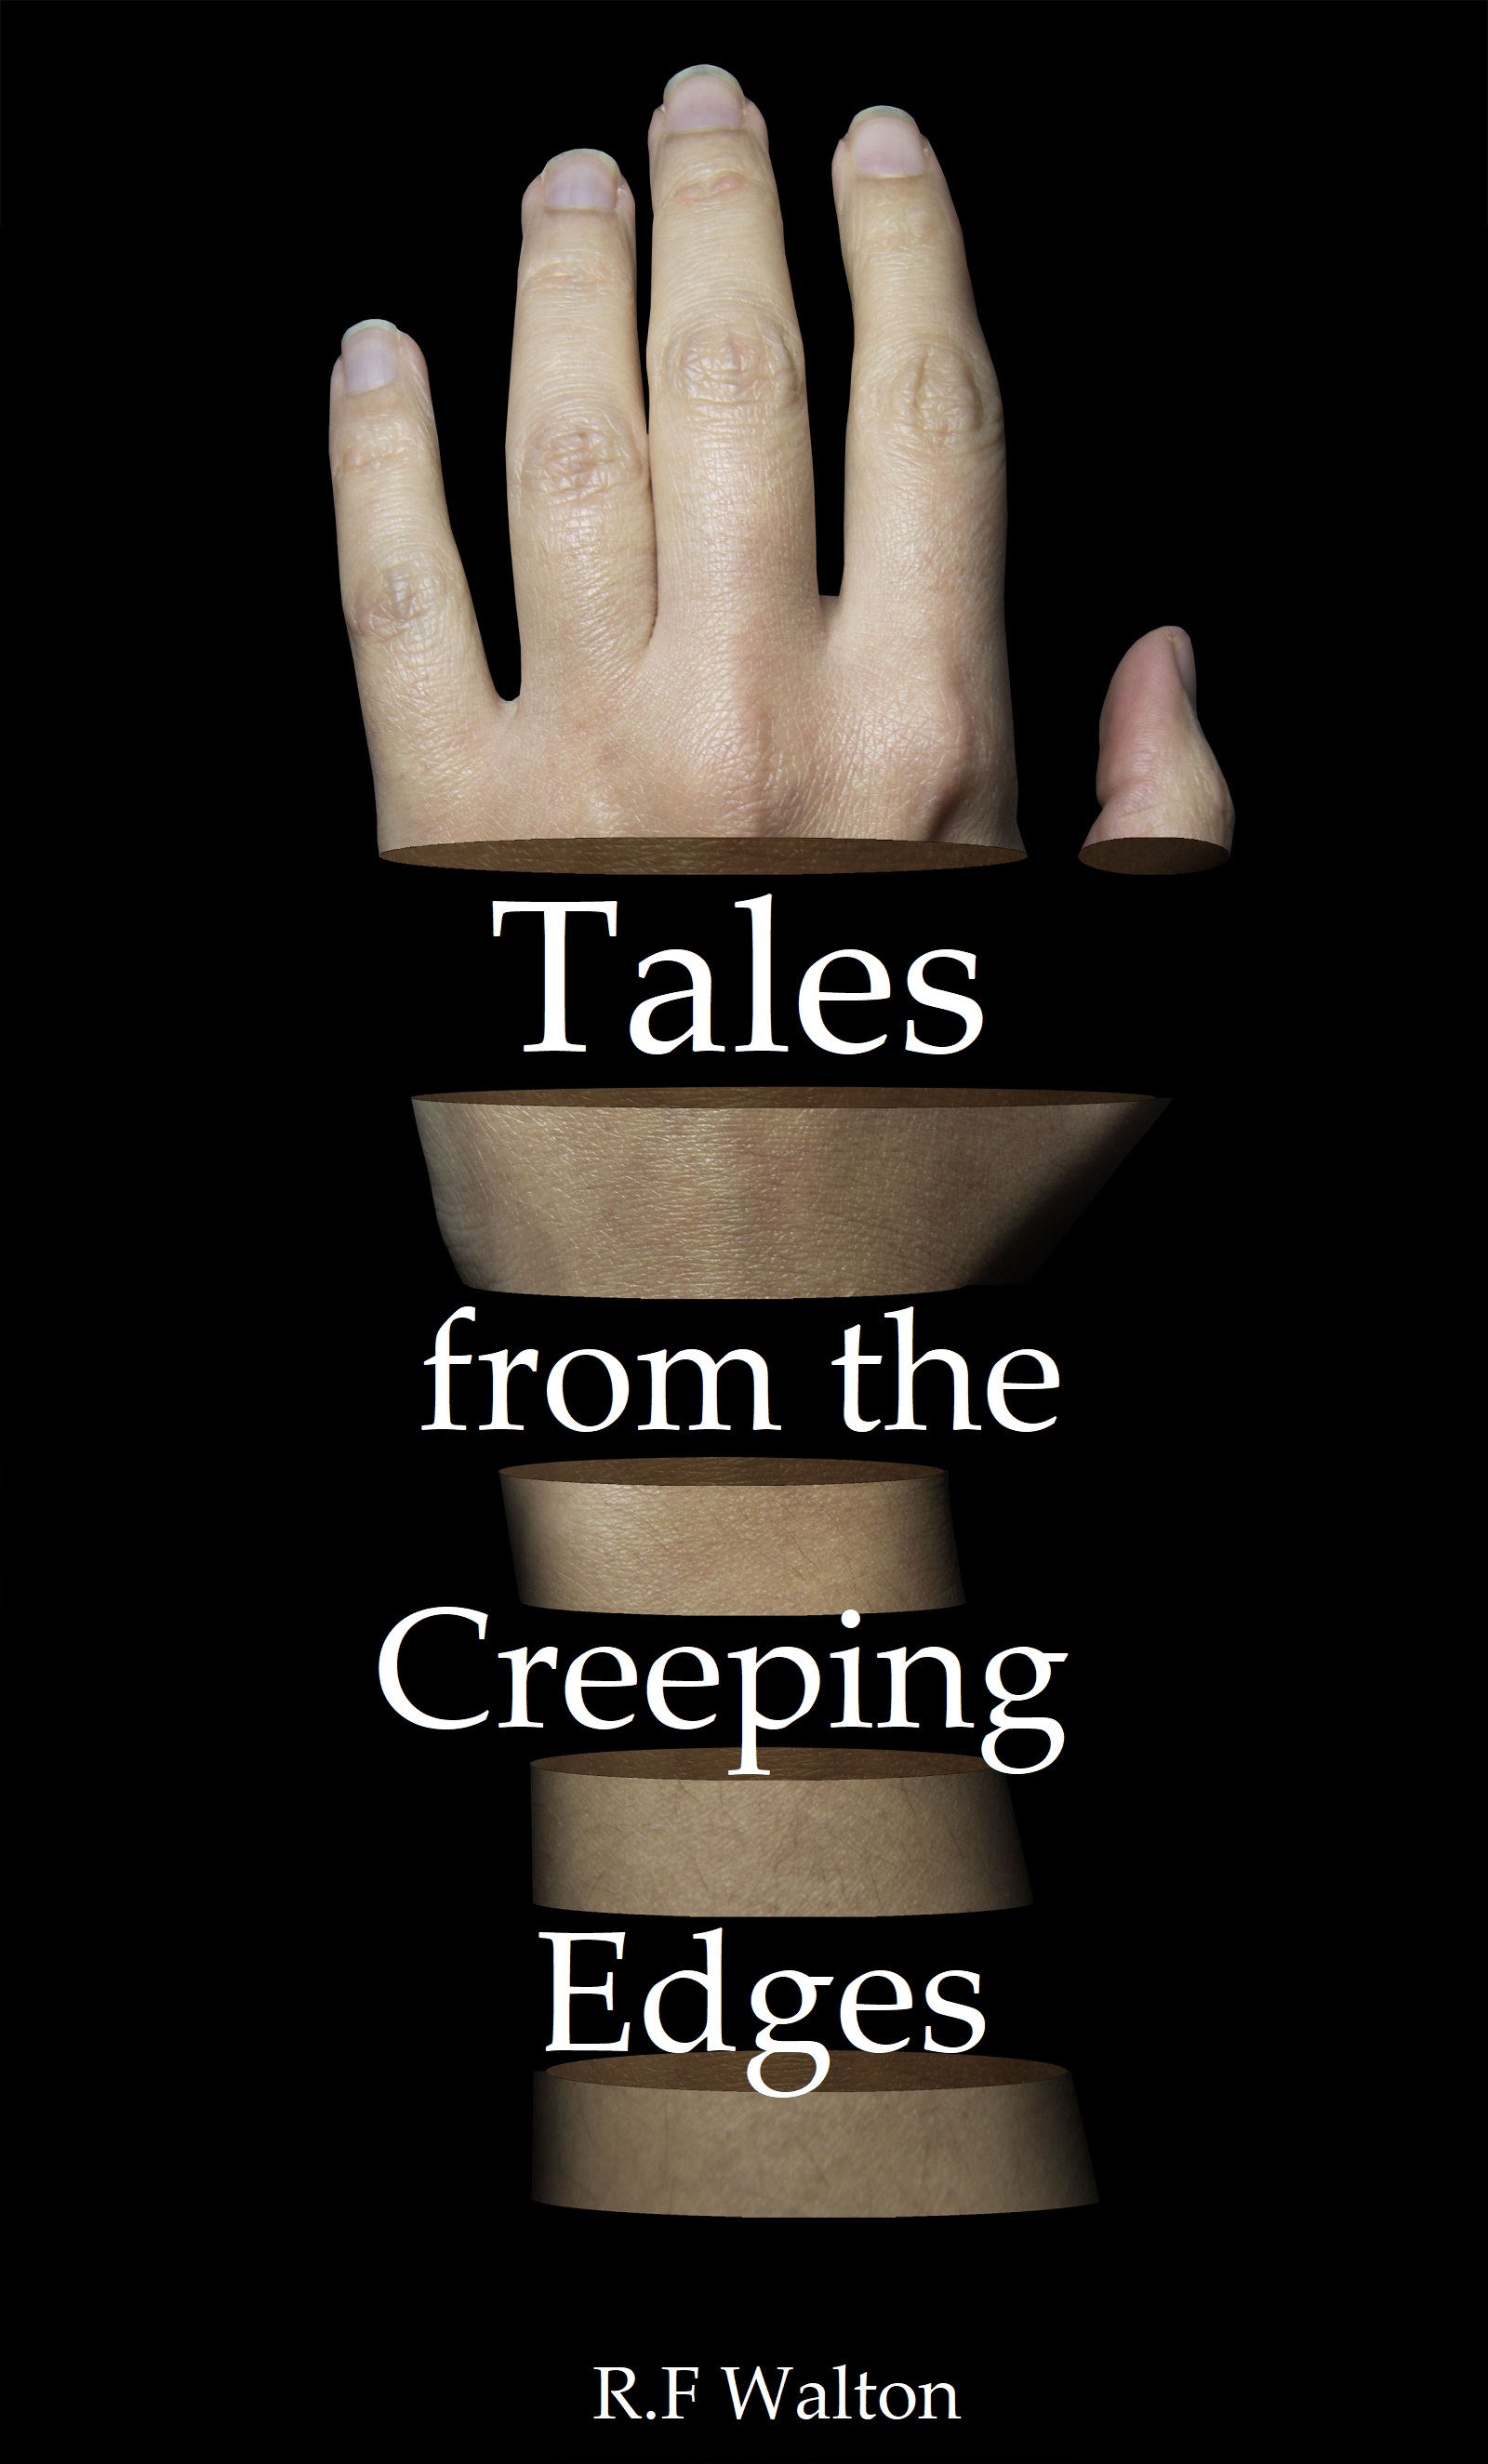 Image of cover of Tales from the Creeping Edges